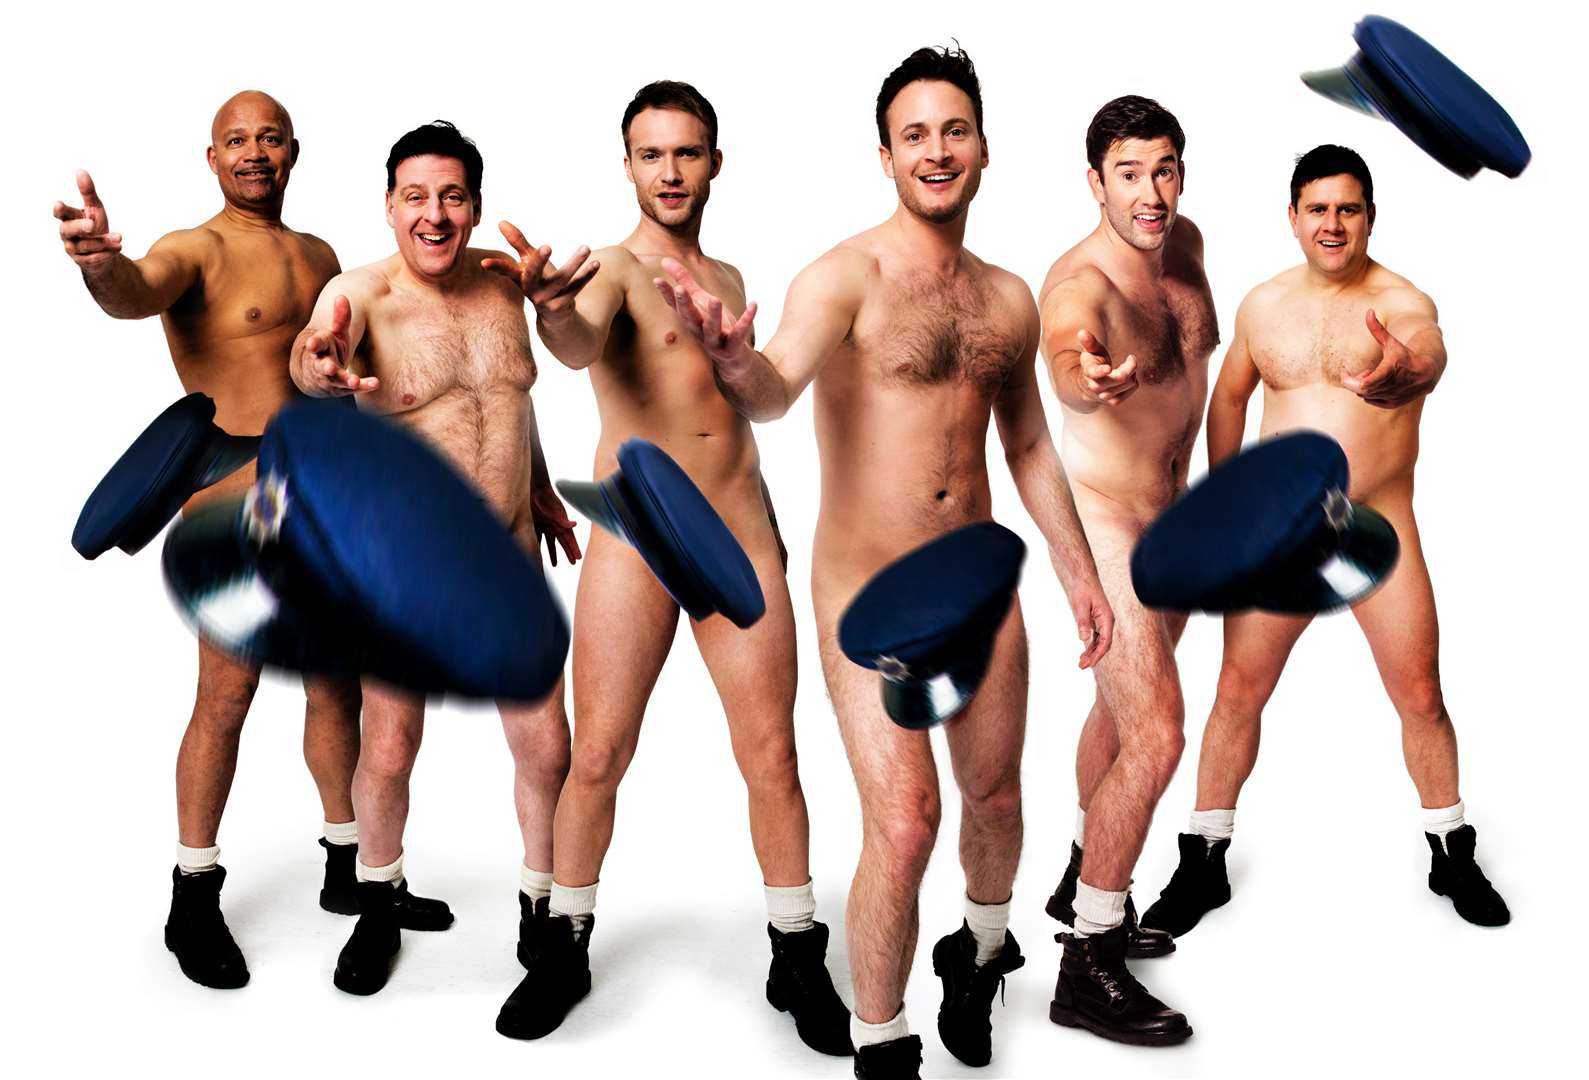 The Full Monty is coming to Herne Bay